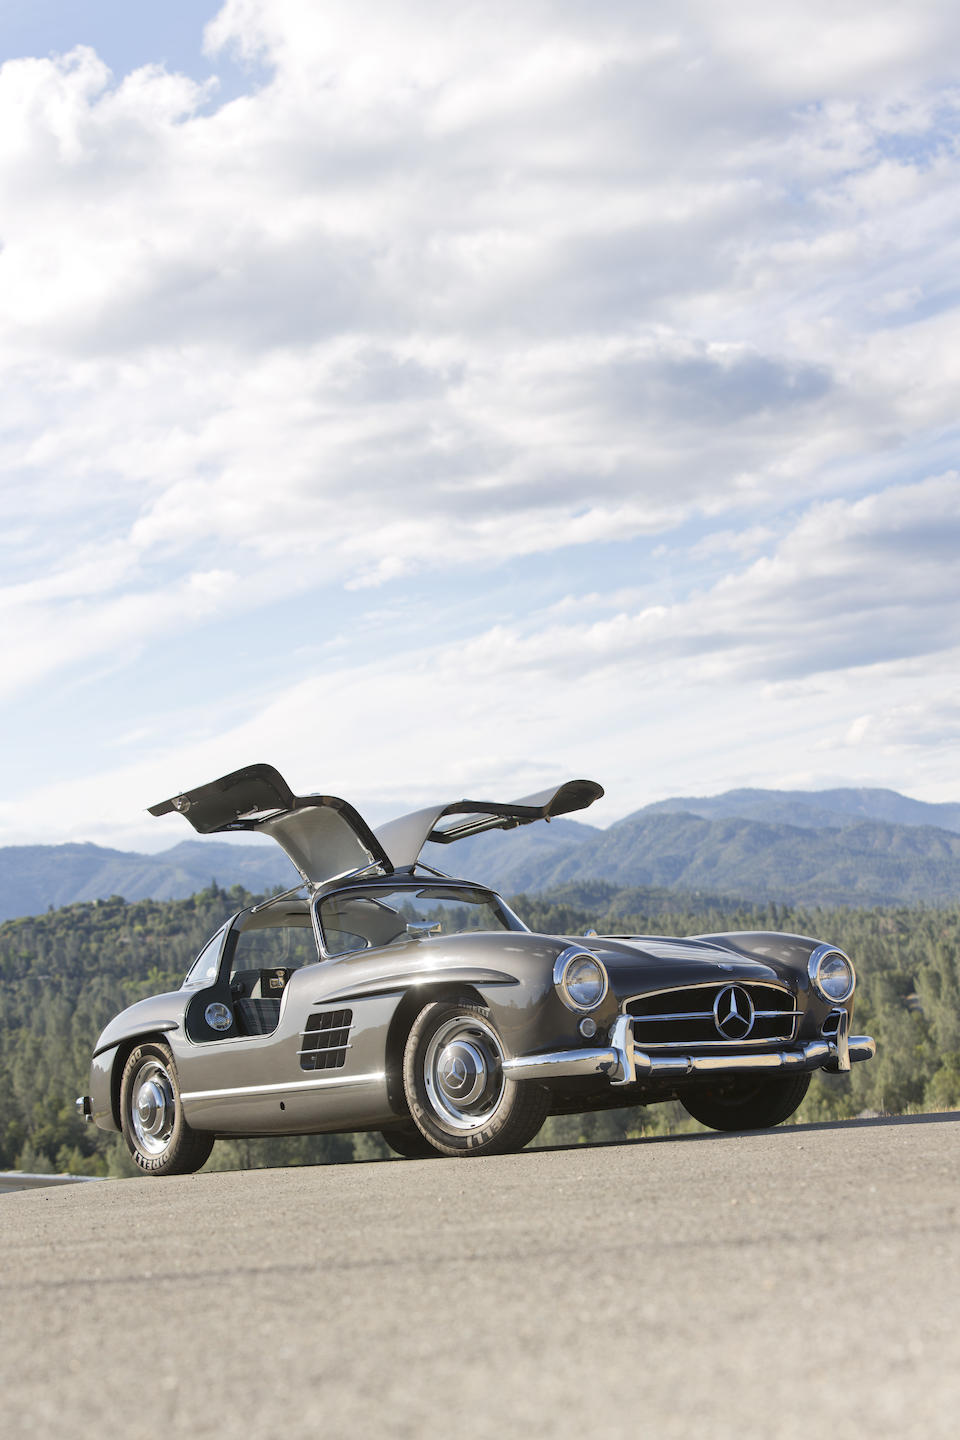 1955 Mercedes-Benz 300SL Gullwing Coupe  Chassis no. 198.040.5500183 Engine no. 198.980.5500184